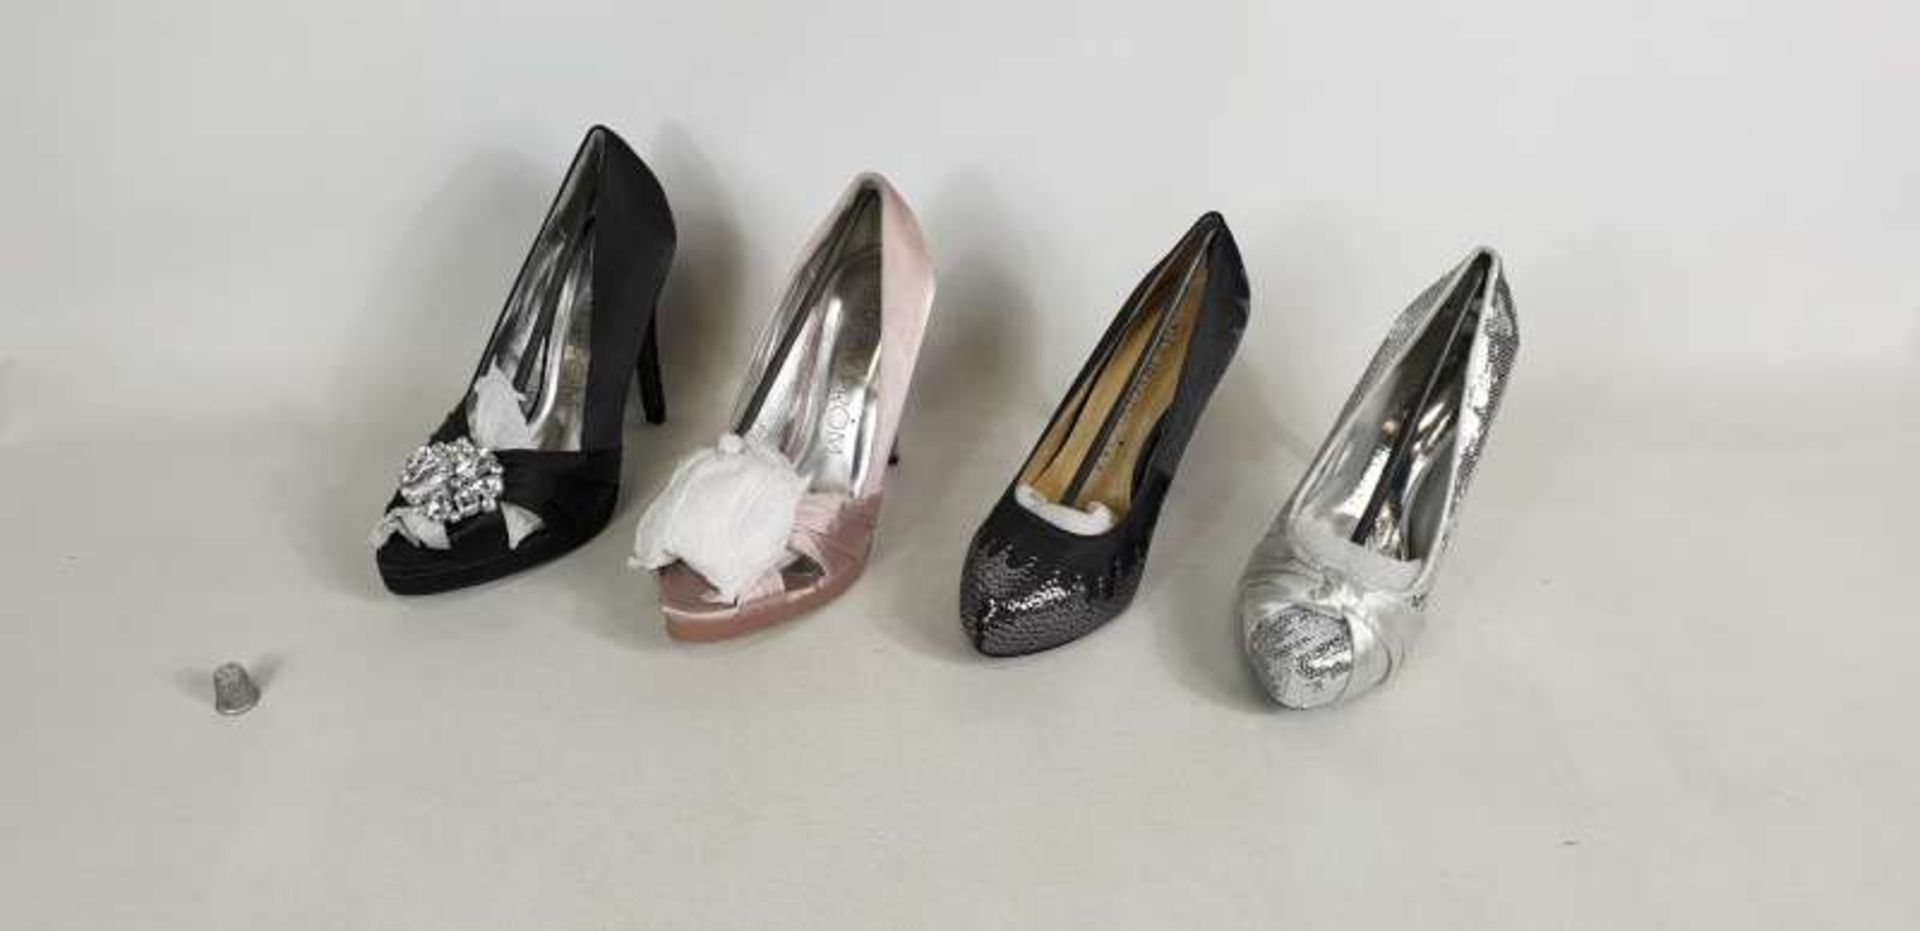 36 X RUBY PROM SHOES IN VARIOUS SIZES AND COLOURS